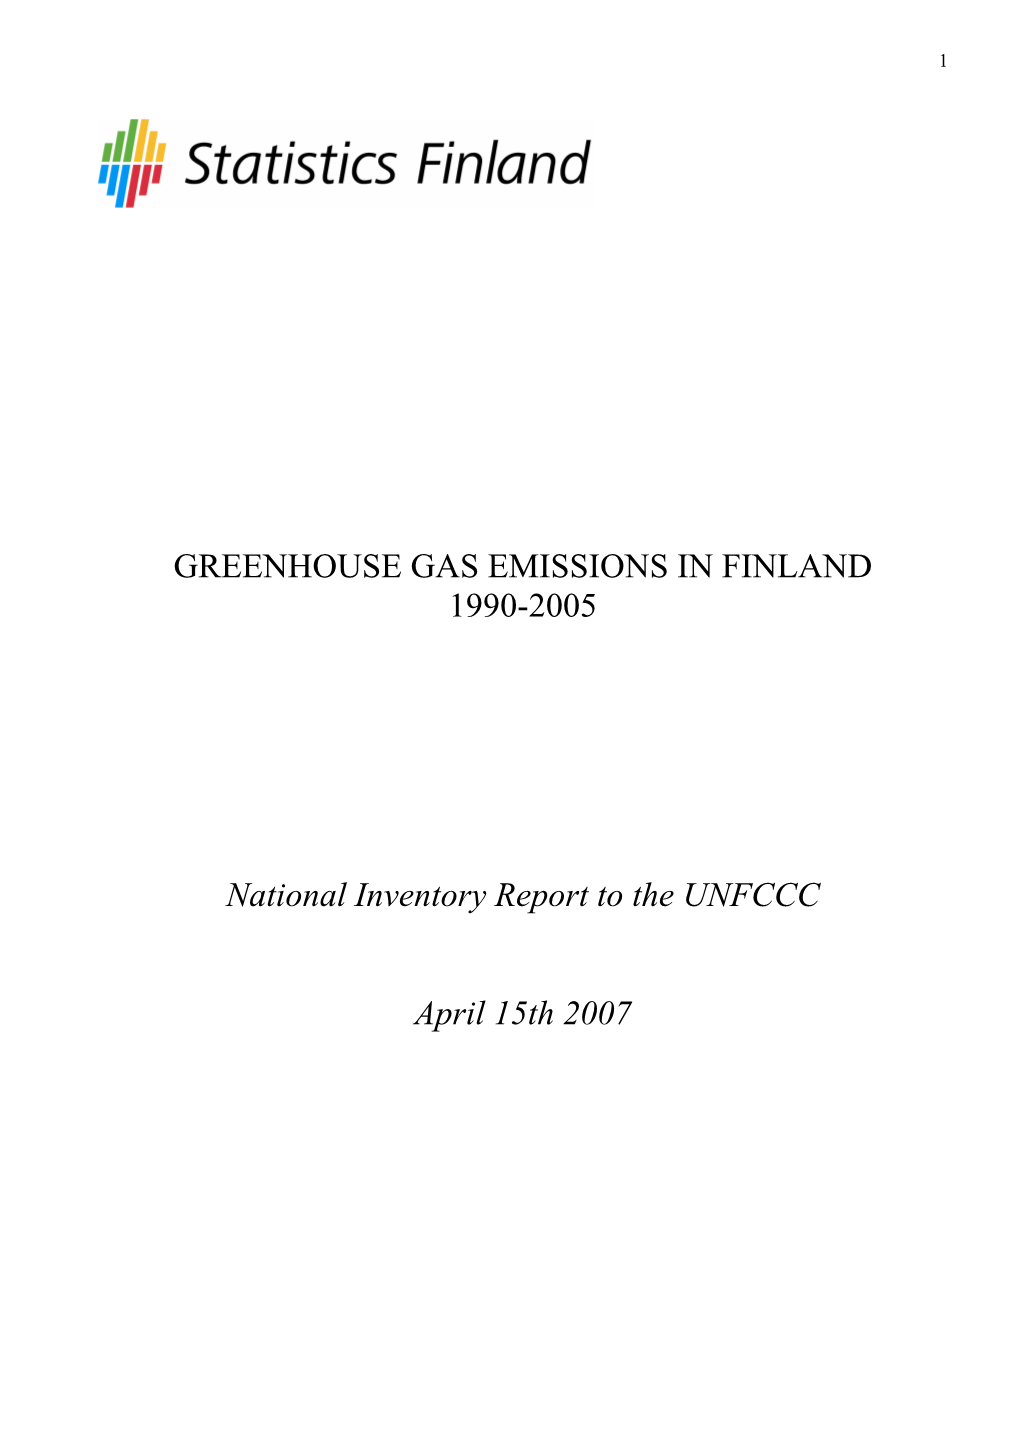 GREENHOUSE GAS EMISSIONS in FINLAND 1990-2005 National